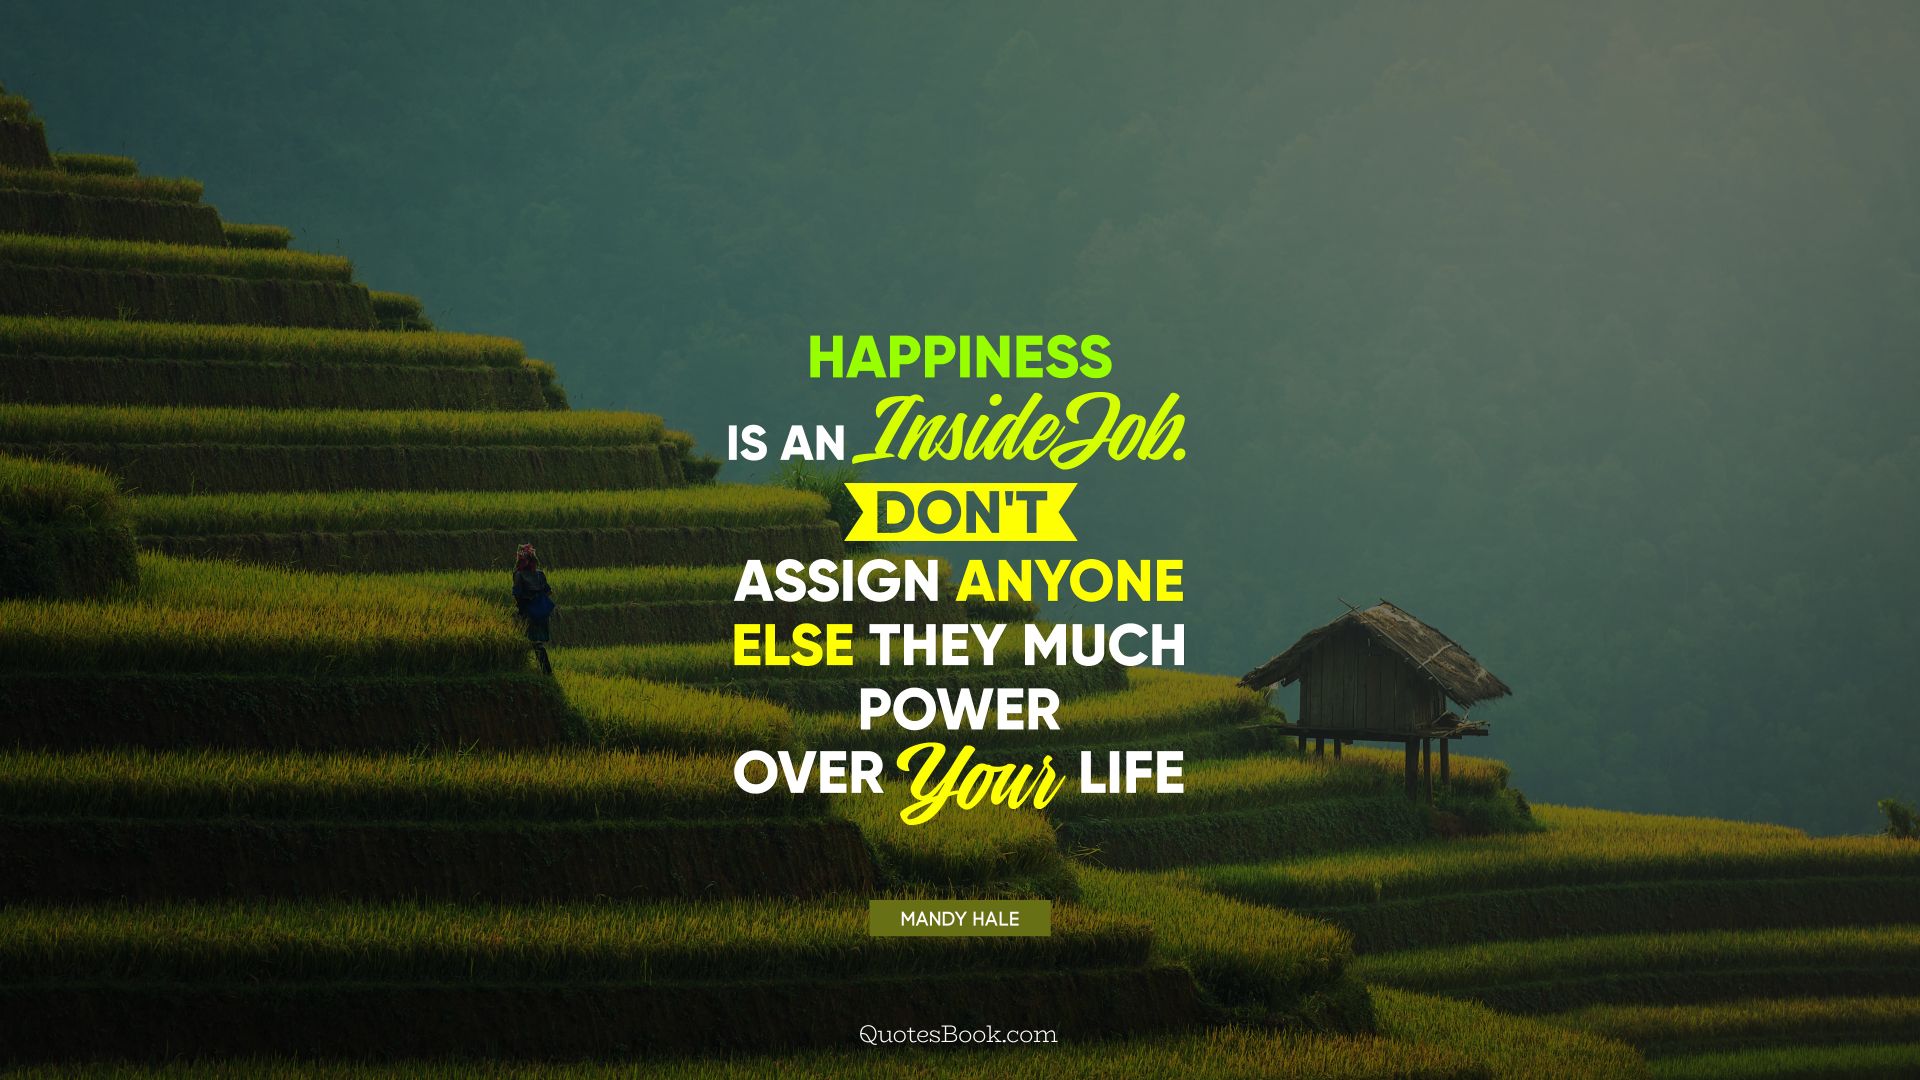 Happiness is an inside job. Don't assign anyone else they much power over your life. - Quote by Mandy Hale